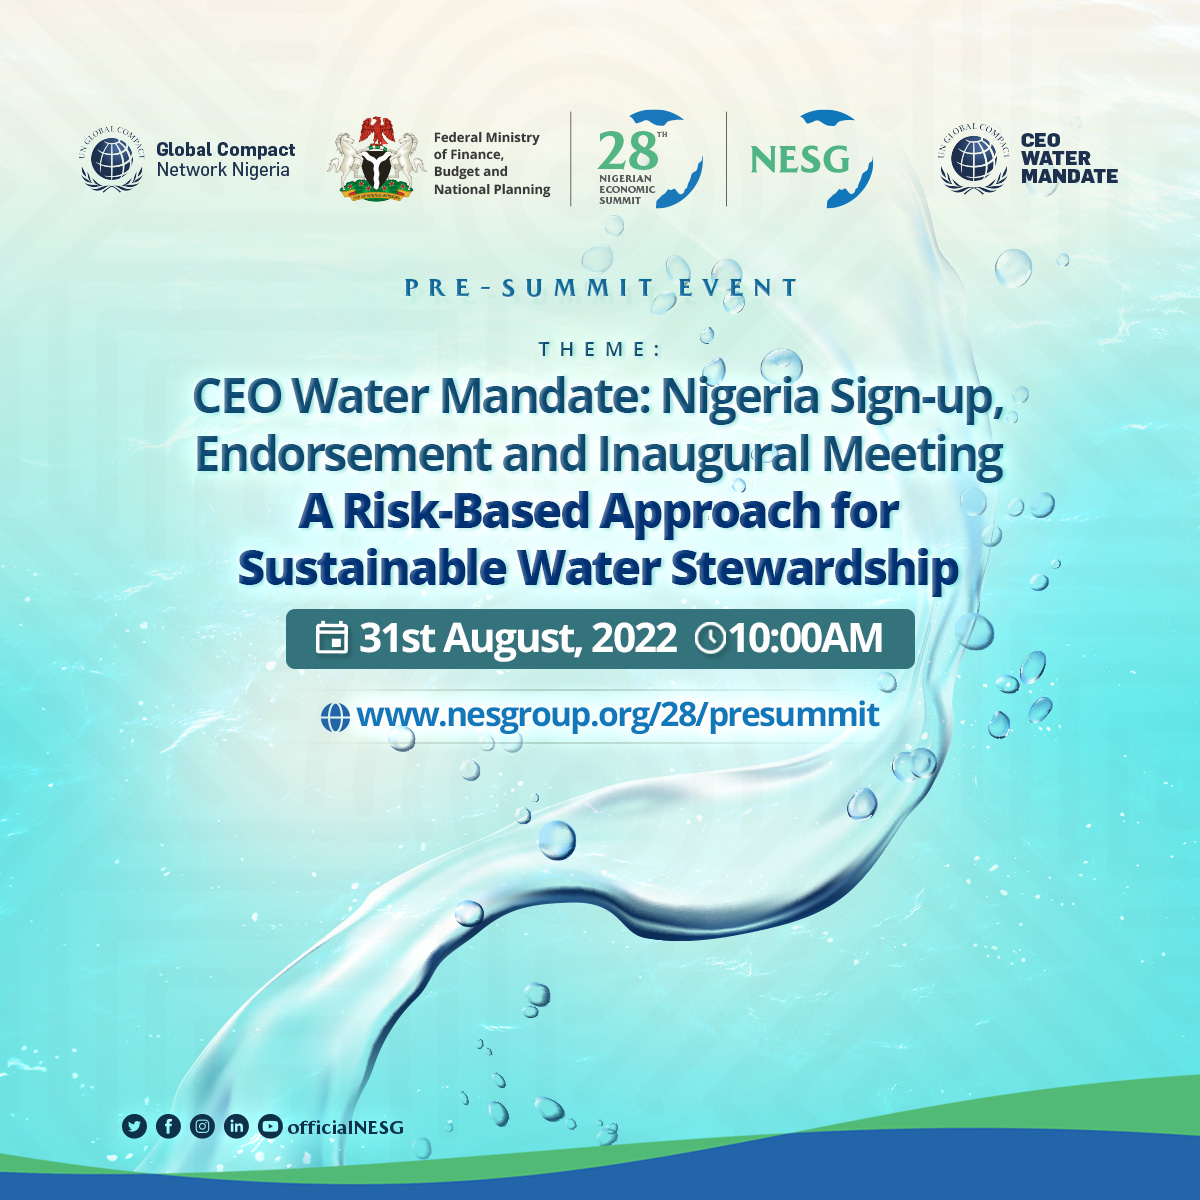 CEO Water Mandate: Nigeria Sign-up, Endorsement &  Inaugural Meeting, A Risk-Based Approach for Sustainable Water Stewardship, The Nigerian Economic Summit Group, The NESG, think-tank, think, tank, nigeria, policy, nesg, africa, number one think in africa, best think in nigeria, the best think tank in africa, top 10 think tanks in nigeria, think tank nigeria, economy, business, PPD, public, private, dialogue, Nigeria, Nigeria PPD, NIGERIA, PPD